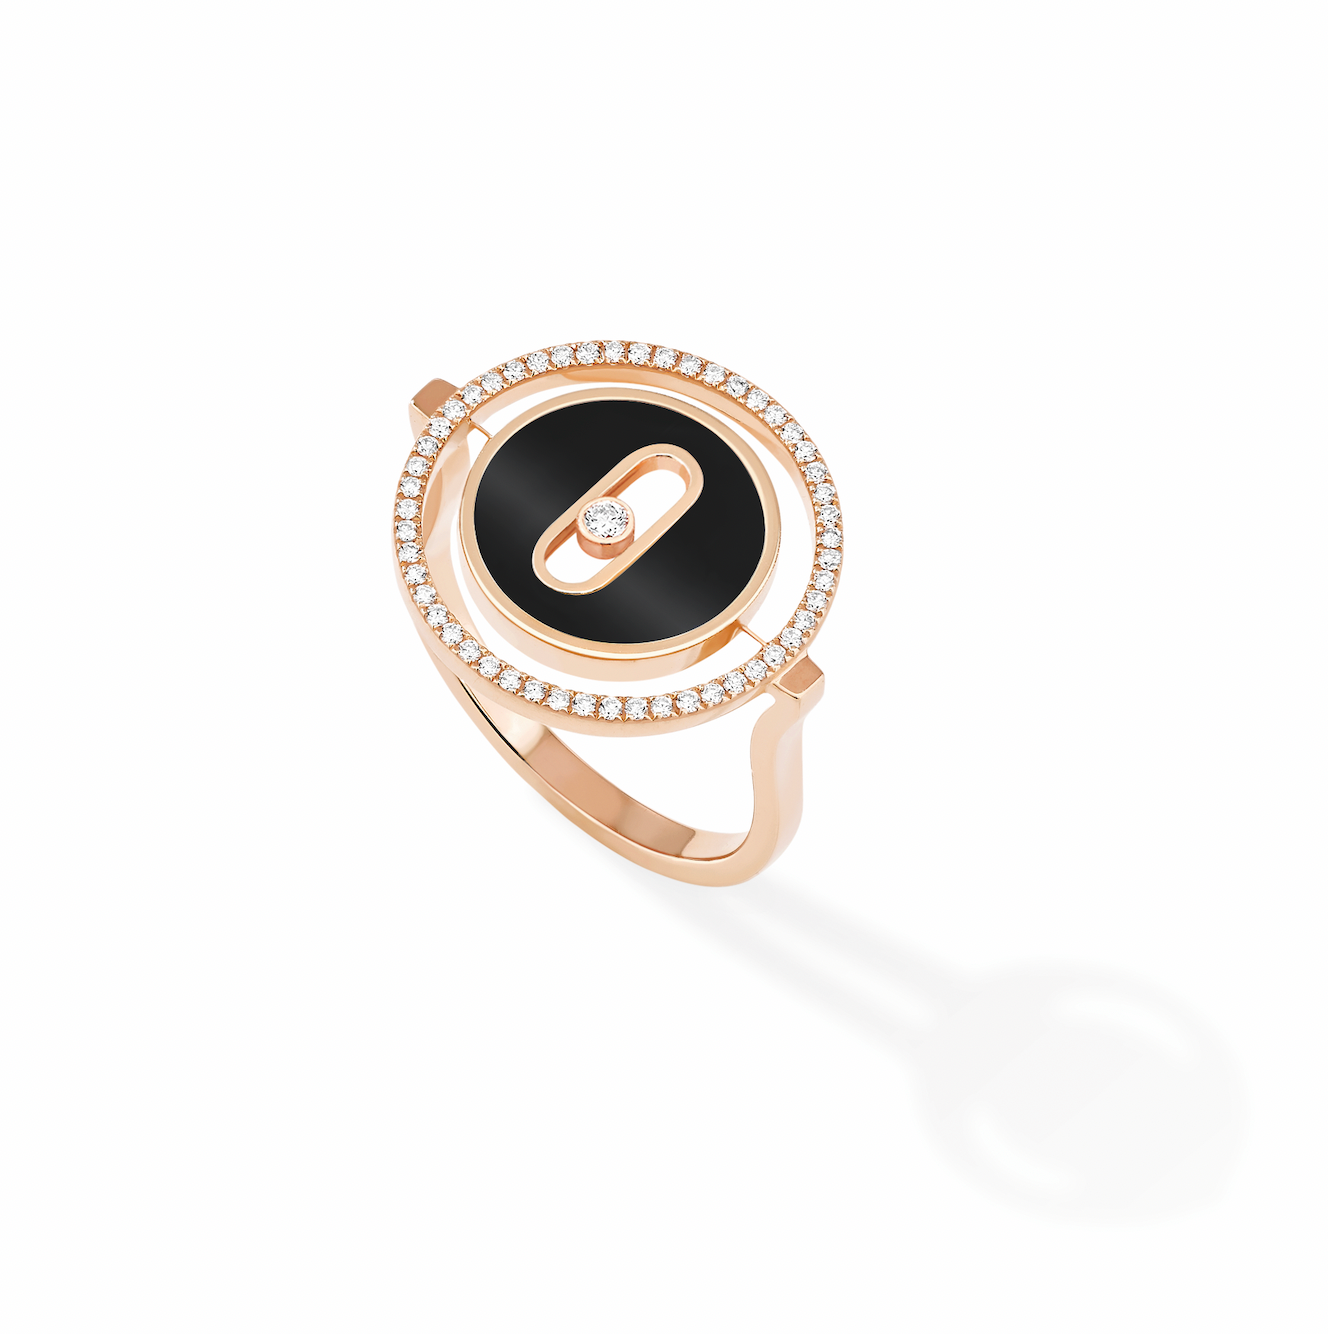 Messika PINK GOLD DIAMOND RING LUCKY MOVE PM ONYX RING 12322-PG-53